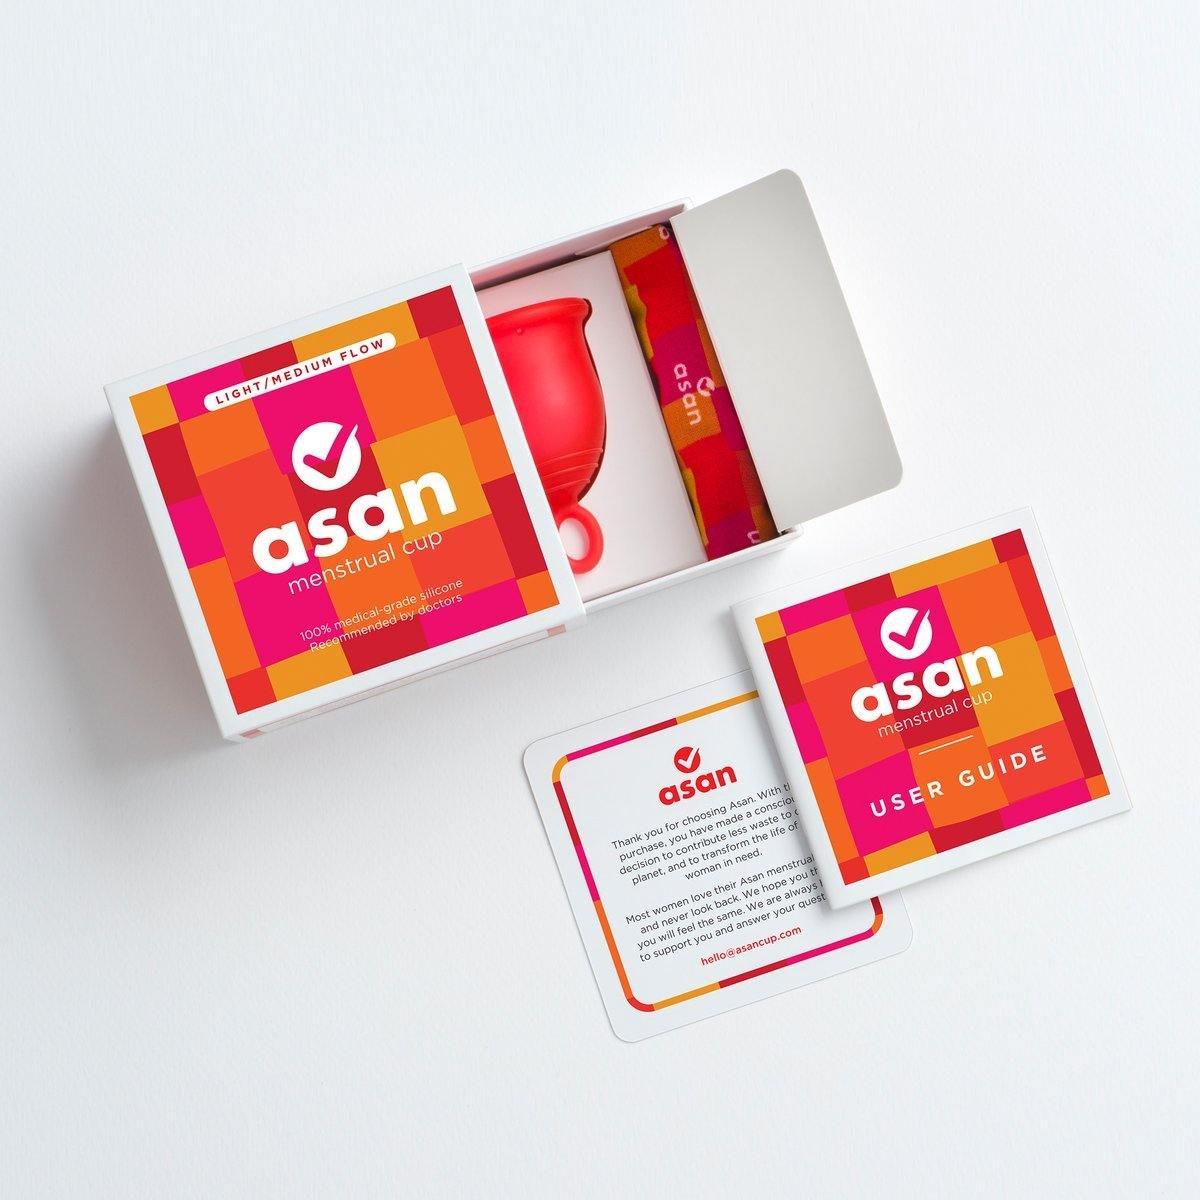 *combo pack* asan cup + cleanser @15% off - Asan